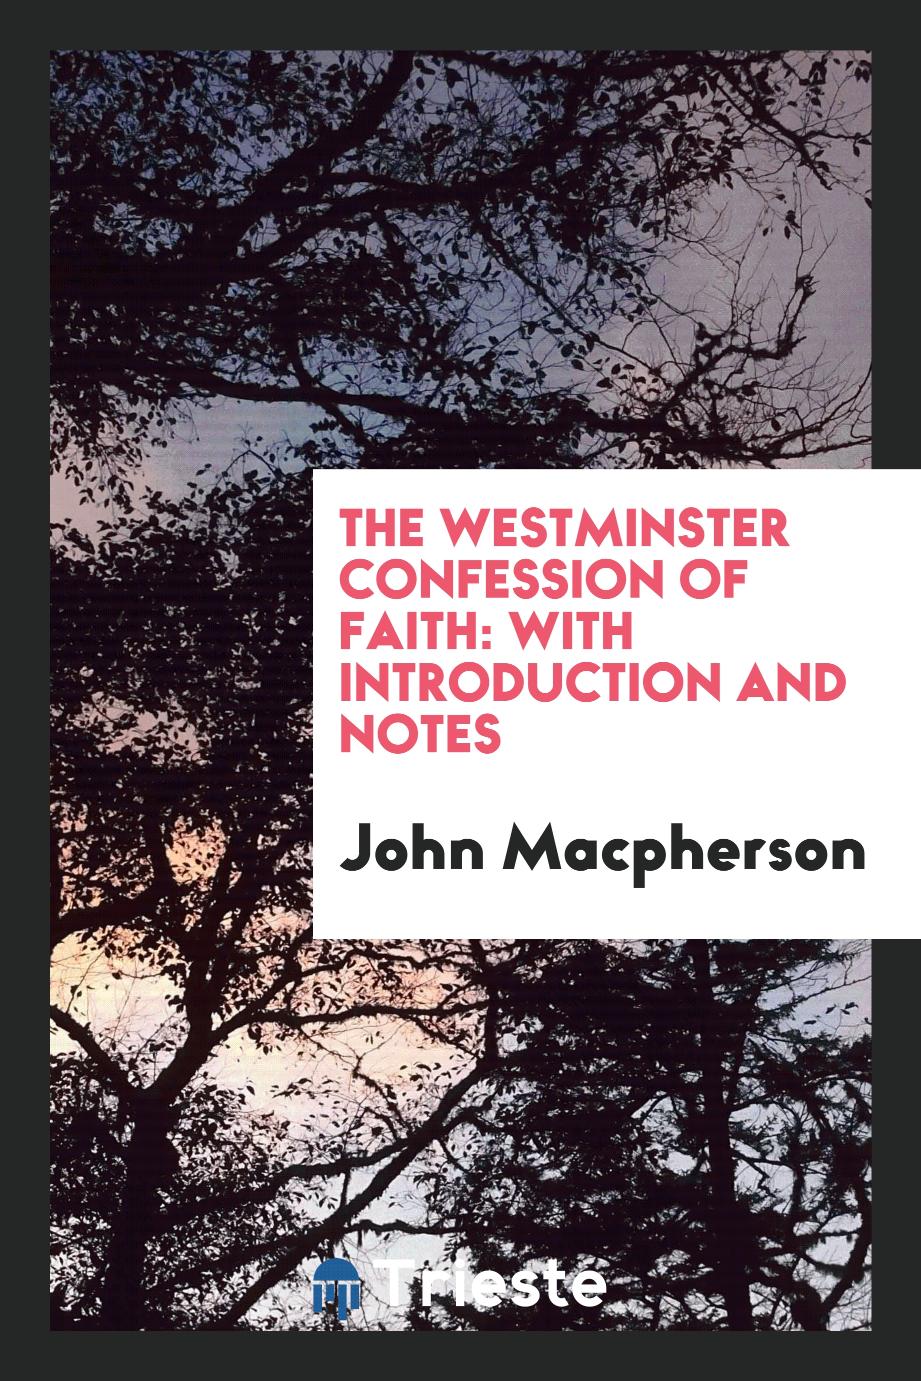 The Westminster confession of faith: with introduction and notes